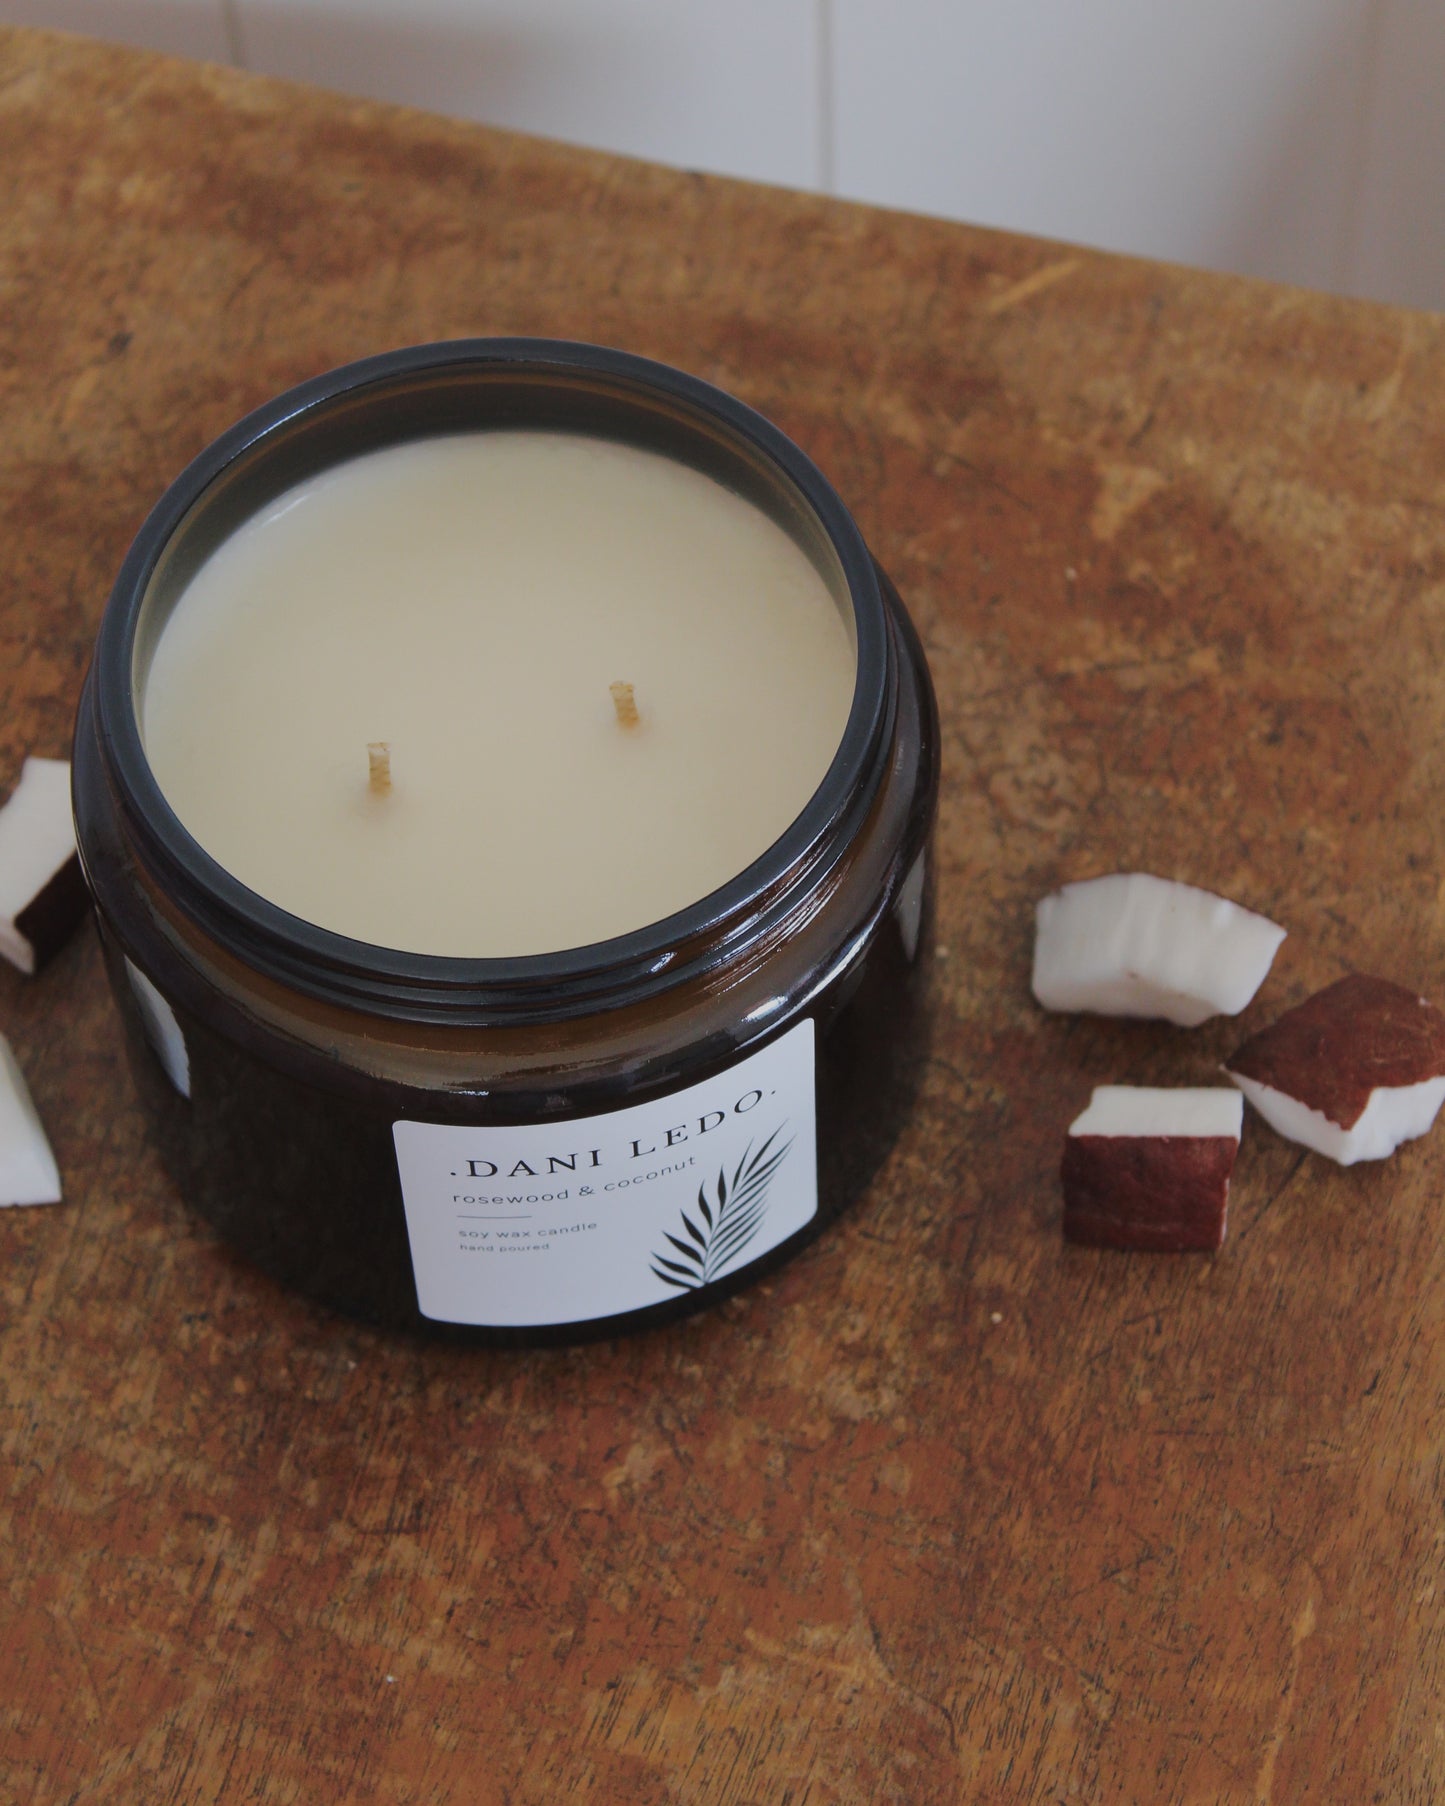 Rosewood & Coconut Double Wick Candle